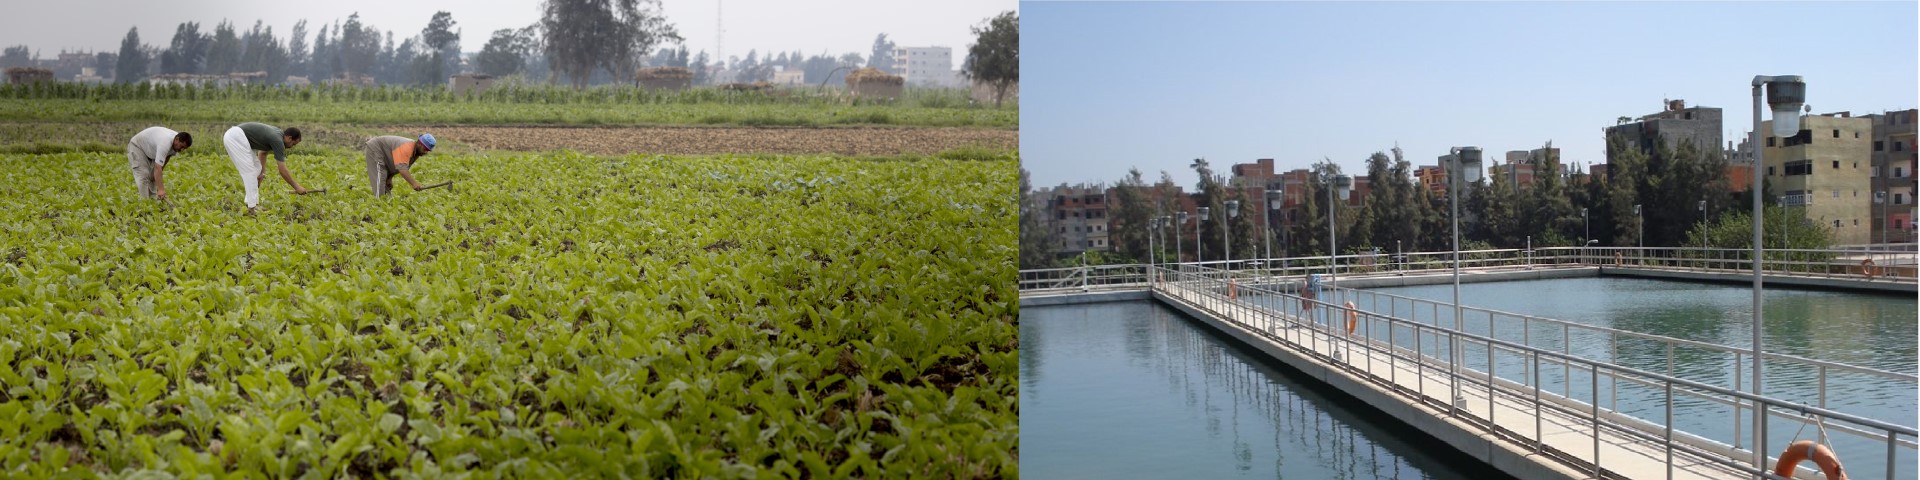 A collage of two photos showing a sewage treatment plant and workers on an agricultural field.